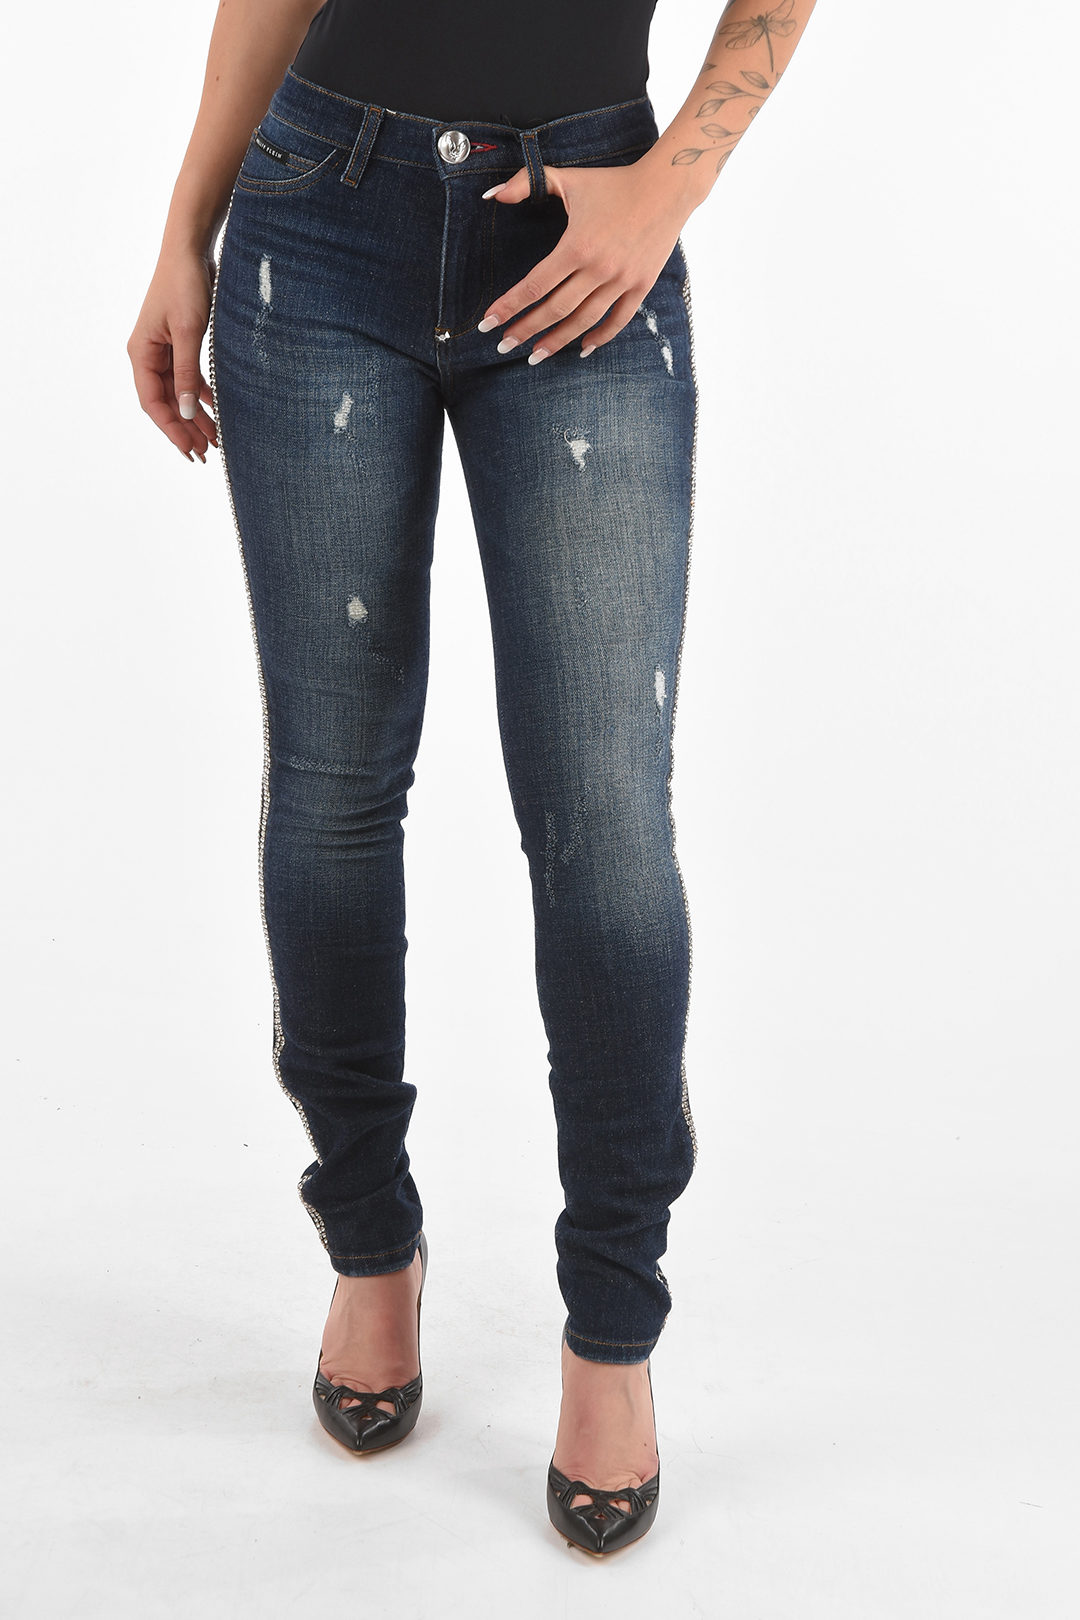 Women's Pull-On Skinny Ripped and Distressed Denim Jeggings | Groupon